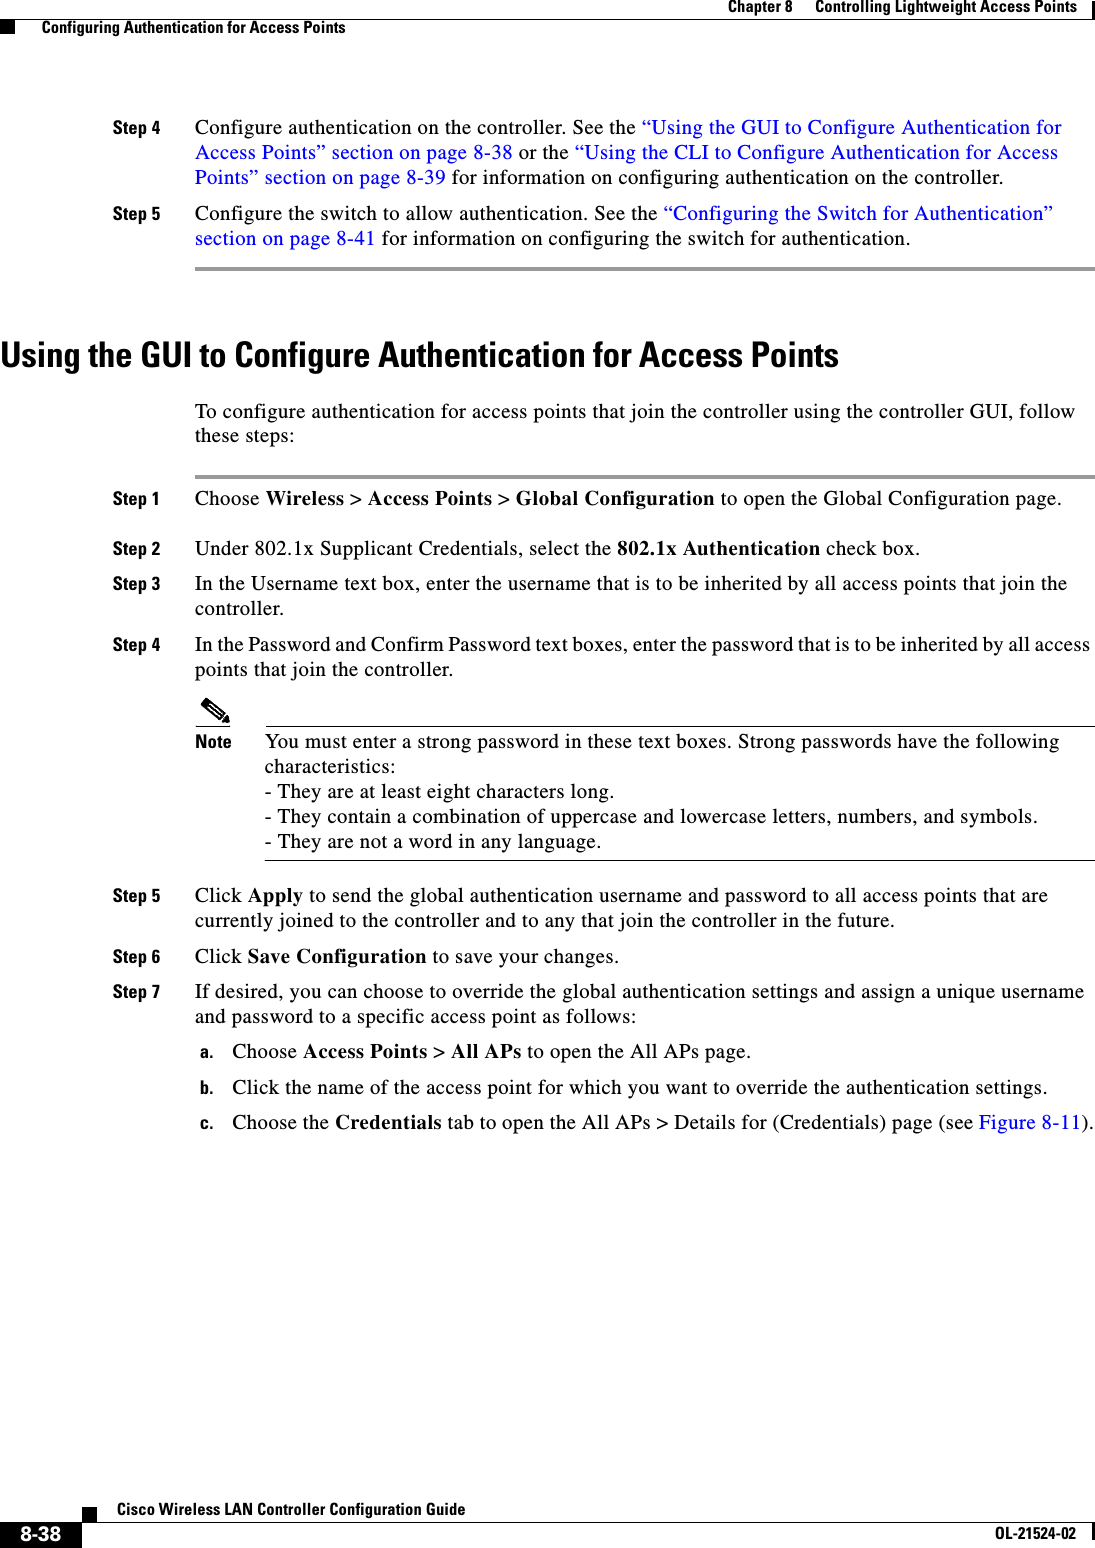  8-38Cisco Wireless LAN Controller Configuration GuideOL-21524-02Chapter 8      Controlling Lightweight Access Points  Configuring Authentication for Access PointsStep 4 Configure authentication on the controller. See the “Using the GUI to Configure Authentication for Access Points” section on page 8-38 or the “Using the CLI to Configure Authentication for Access Points” section on page 8-39 for information on configuring authentication on the controller.Step 5 Configure the switch to allow authentication. See the “Configuring the Switch for Authentication” section on page 8-41 for information on configuring the switch for authentication.Using the GUI to Configure Authentication for Access PointsTo configure authentication for access points that join the controller using the controller GUI, follow these steps:Step 1 Choose Wireless &gt; Access Points &gt; Global Configuration to open the Global Configuration page.Step 2 Under 802.1x Supplicant Credentials, select the 802.1x Authentication check box.Step 3 In the Username text box, enter the username that is to be inherited by all access points that join the controller.Step 4 In the Password and Confirm Password text boxes, enter the password that is to be inherited by all access points that join the controller.Note You must enter a strong password in these text boxes. Strong passwords have the following characteristics: - They are at least eight characters long. - They contain a combination of uppercase and lowercase letters, numbers, and symbols. - They are not a word in any language.Step 5 Click Apply to send the global authentication username and password to all access points that are currently joined to the controller and to any that join the controller in the future.Step 6 Click Save Configuration to save your changes.Step 7 If desired, you can choose to override the global authentication settings and assign a unique username and password to a specific access point as follows:a. Choose Access Points &gt; All APs to open the All APs page.b. Click the name of the access point for which you want to override the authentication settings.c. Choose the Credentials tab to open the All APs &gt; Details for (Credentials) page (see Figure 8-11).